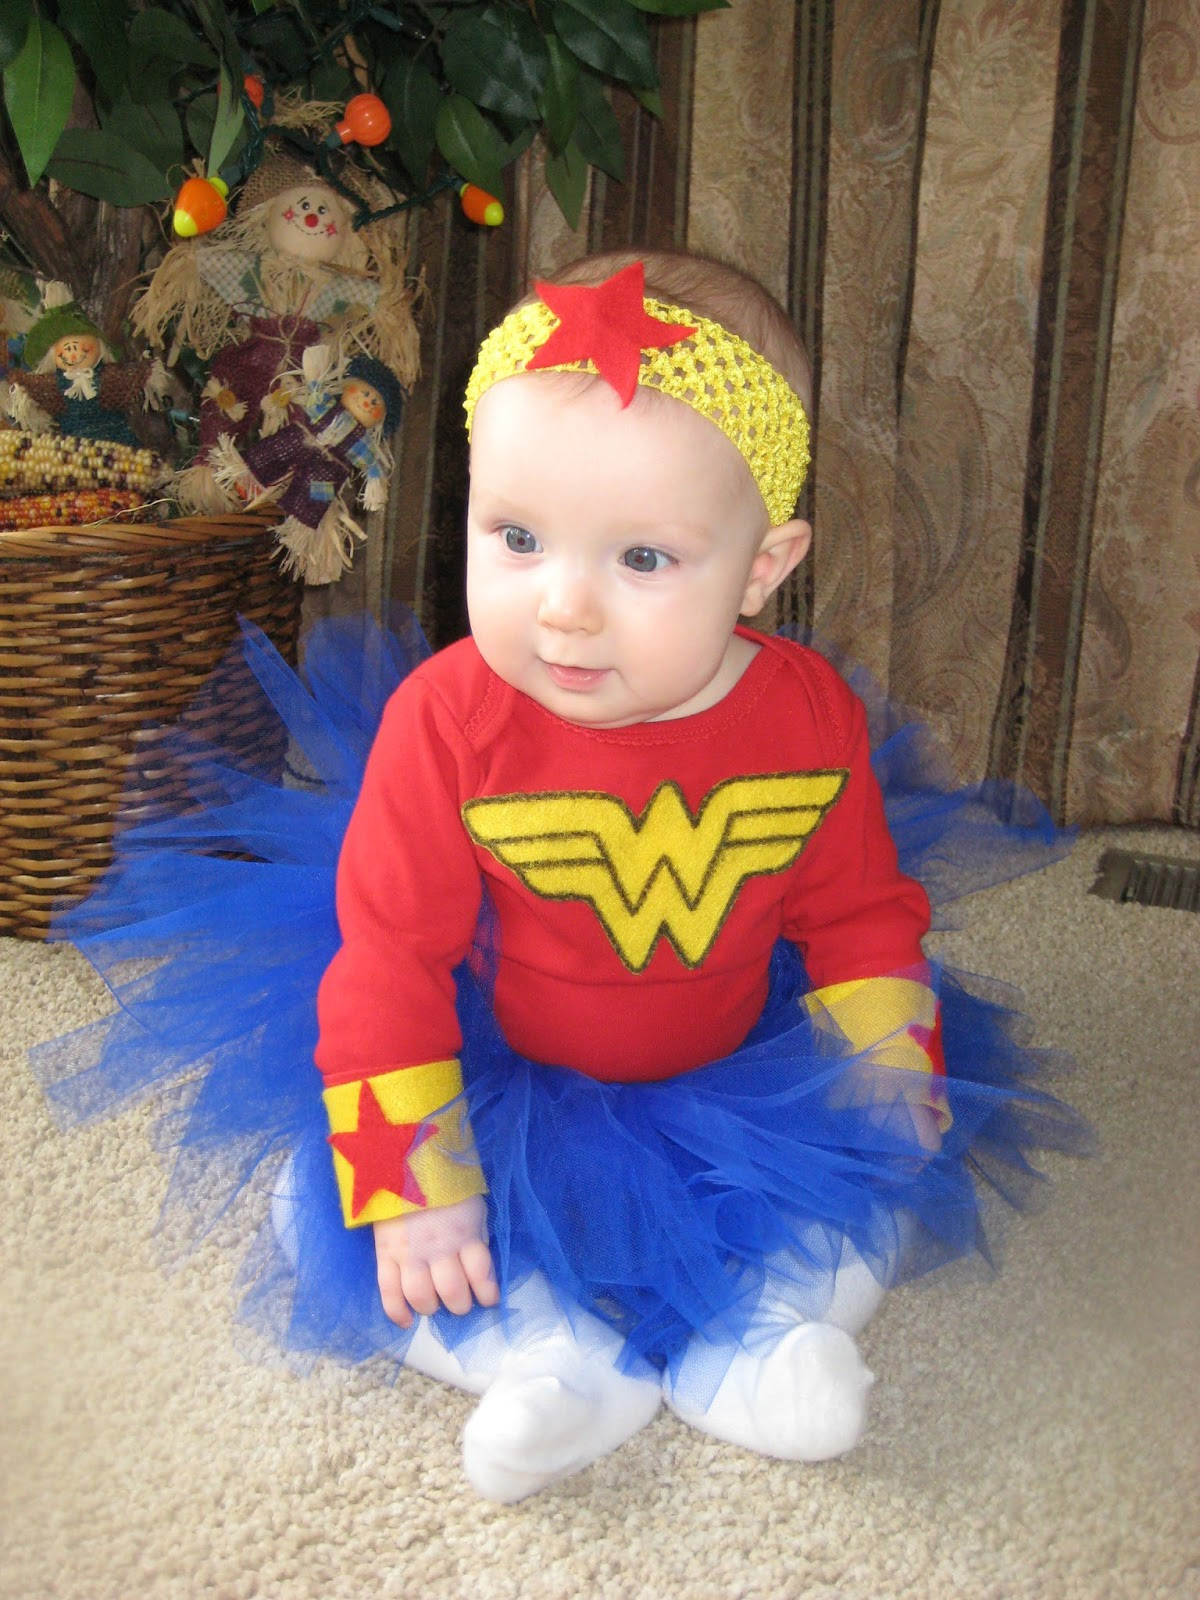 DIY Halloween Costume For Toddlers
 Sweet Little es DIY Halloween Costume Ideas